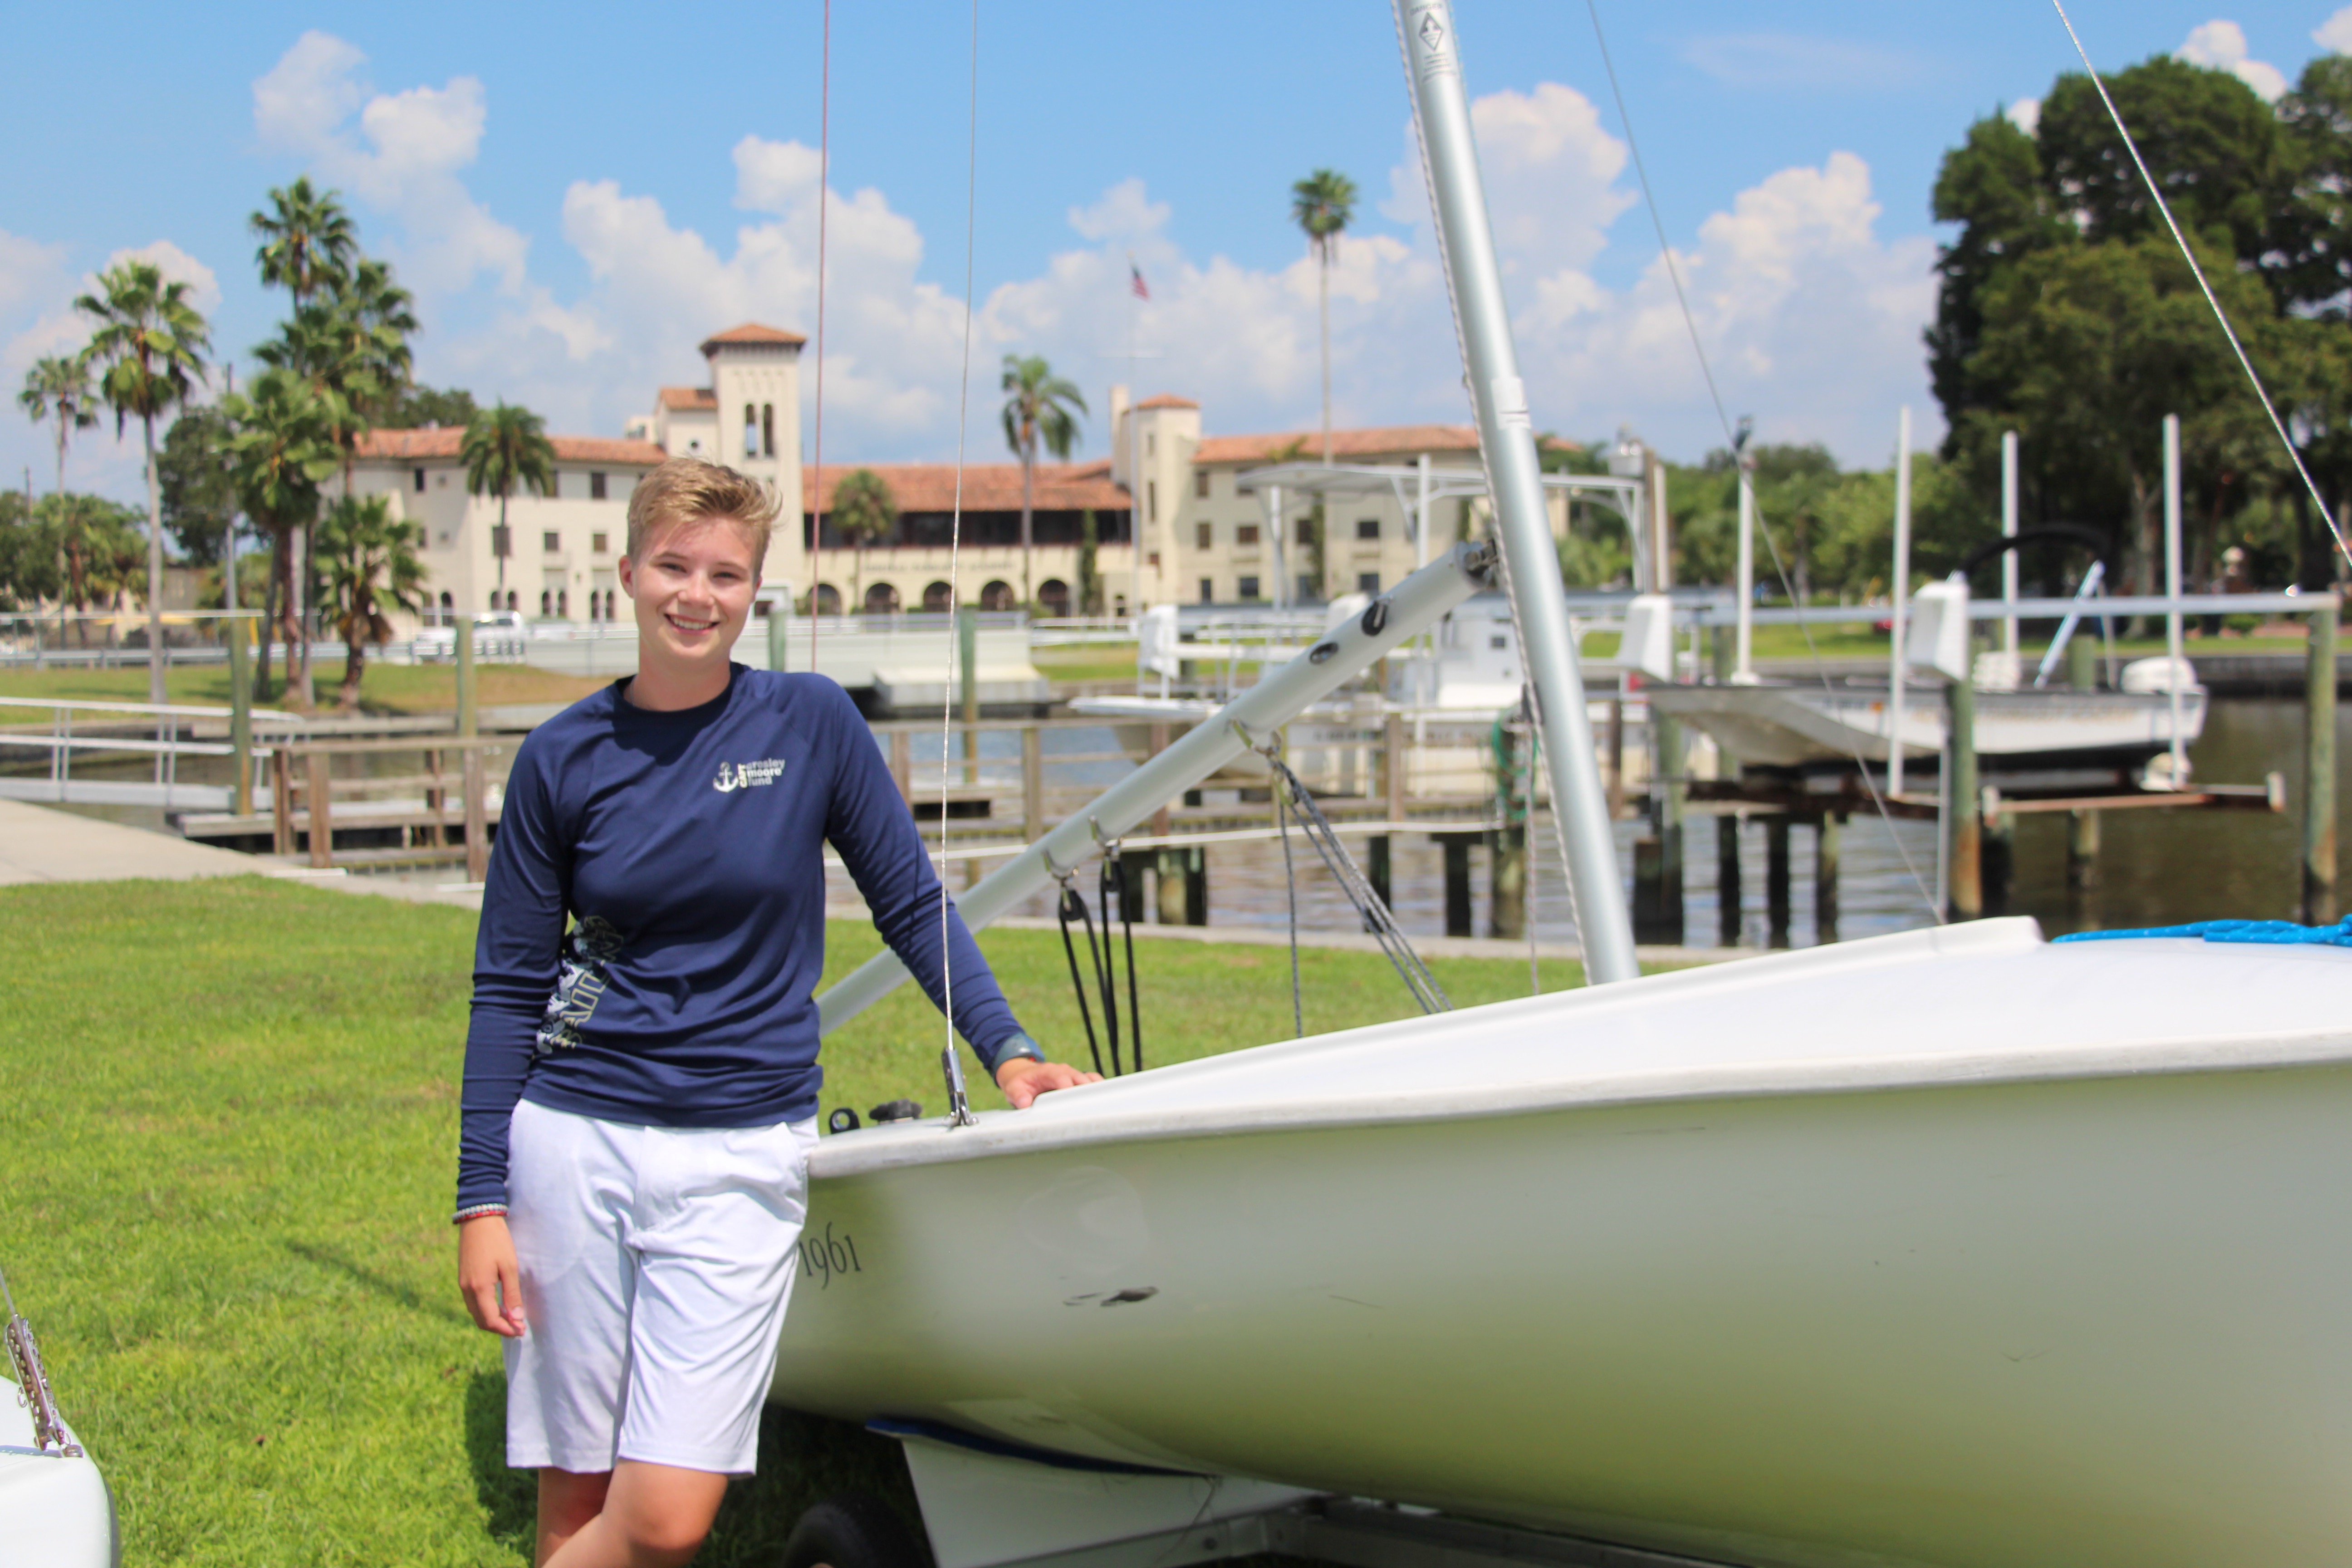 Allie was was the first recipient of the Maj. Megan McClung '91N, '95 USNA Scholarship Award.